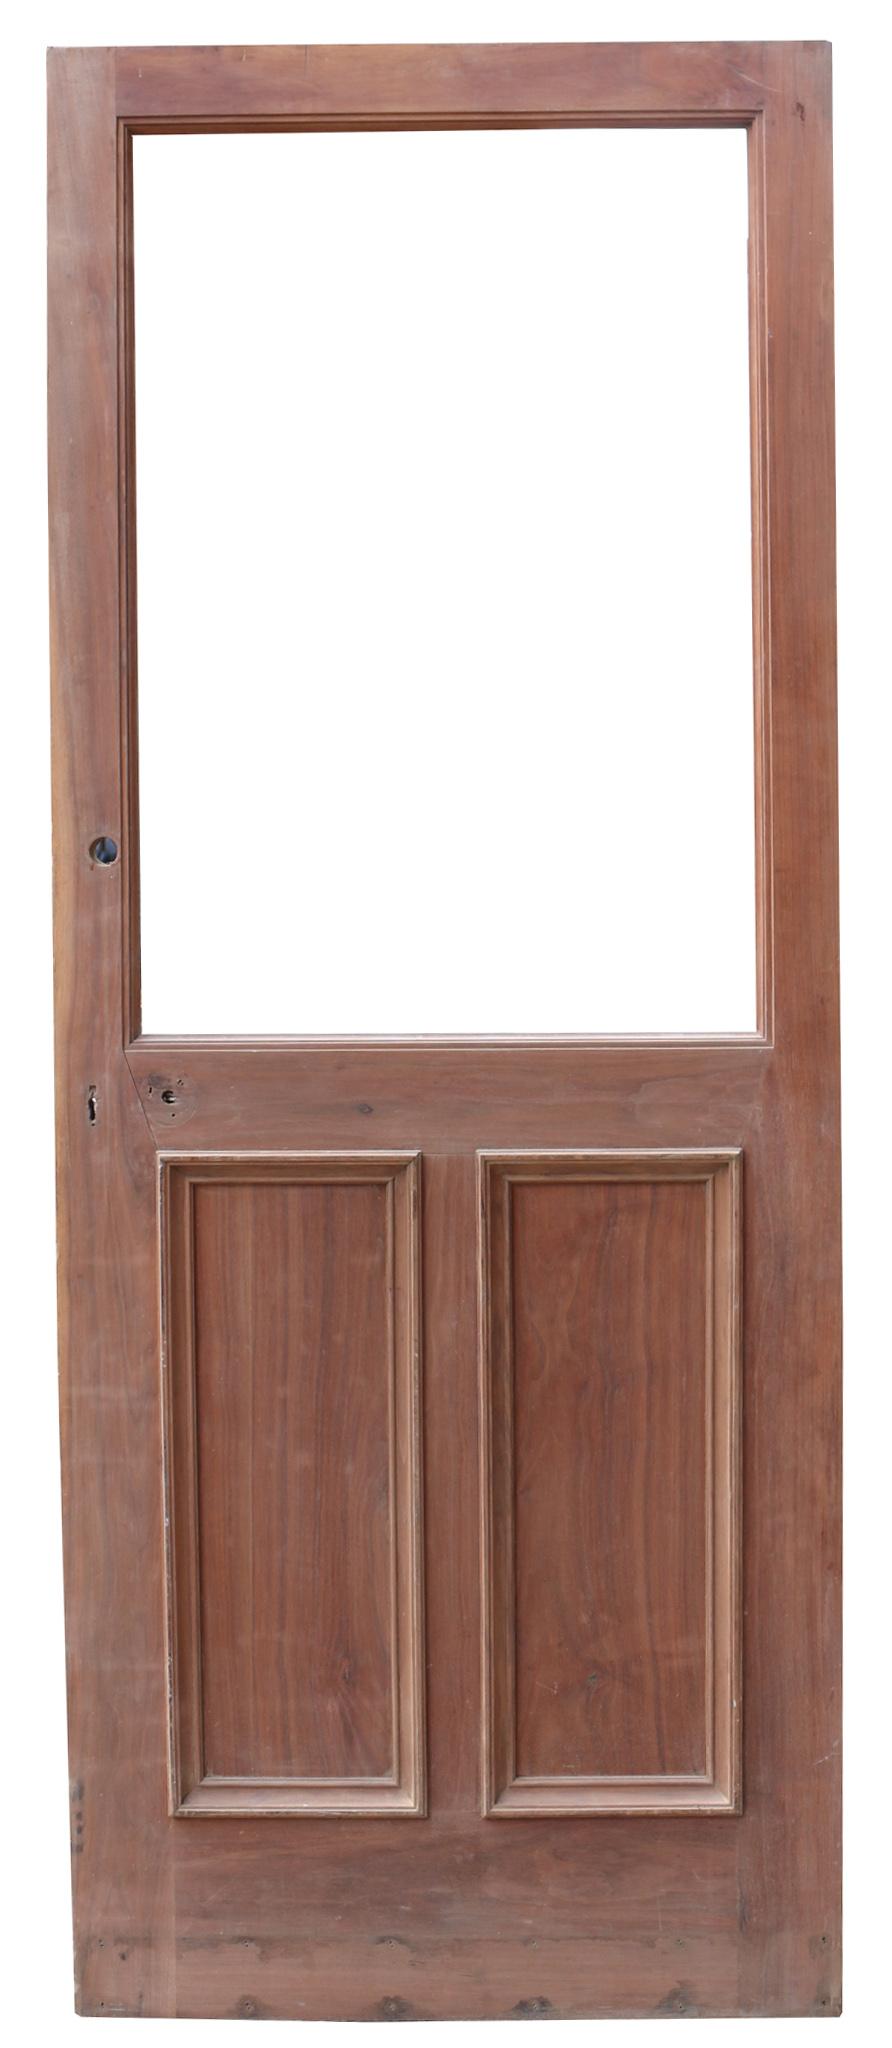 Early 20th Century Walnut Door In Good Condition For Sale In Wormelow, Herefordshire